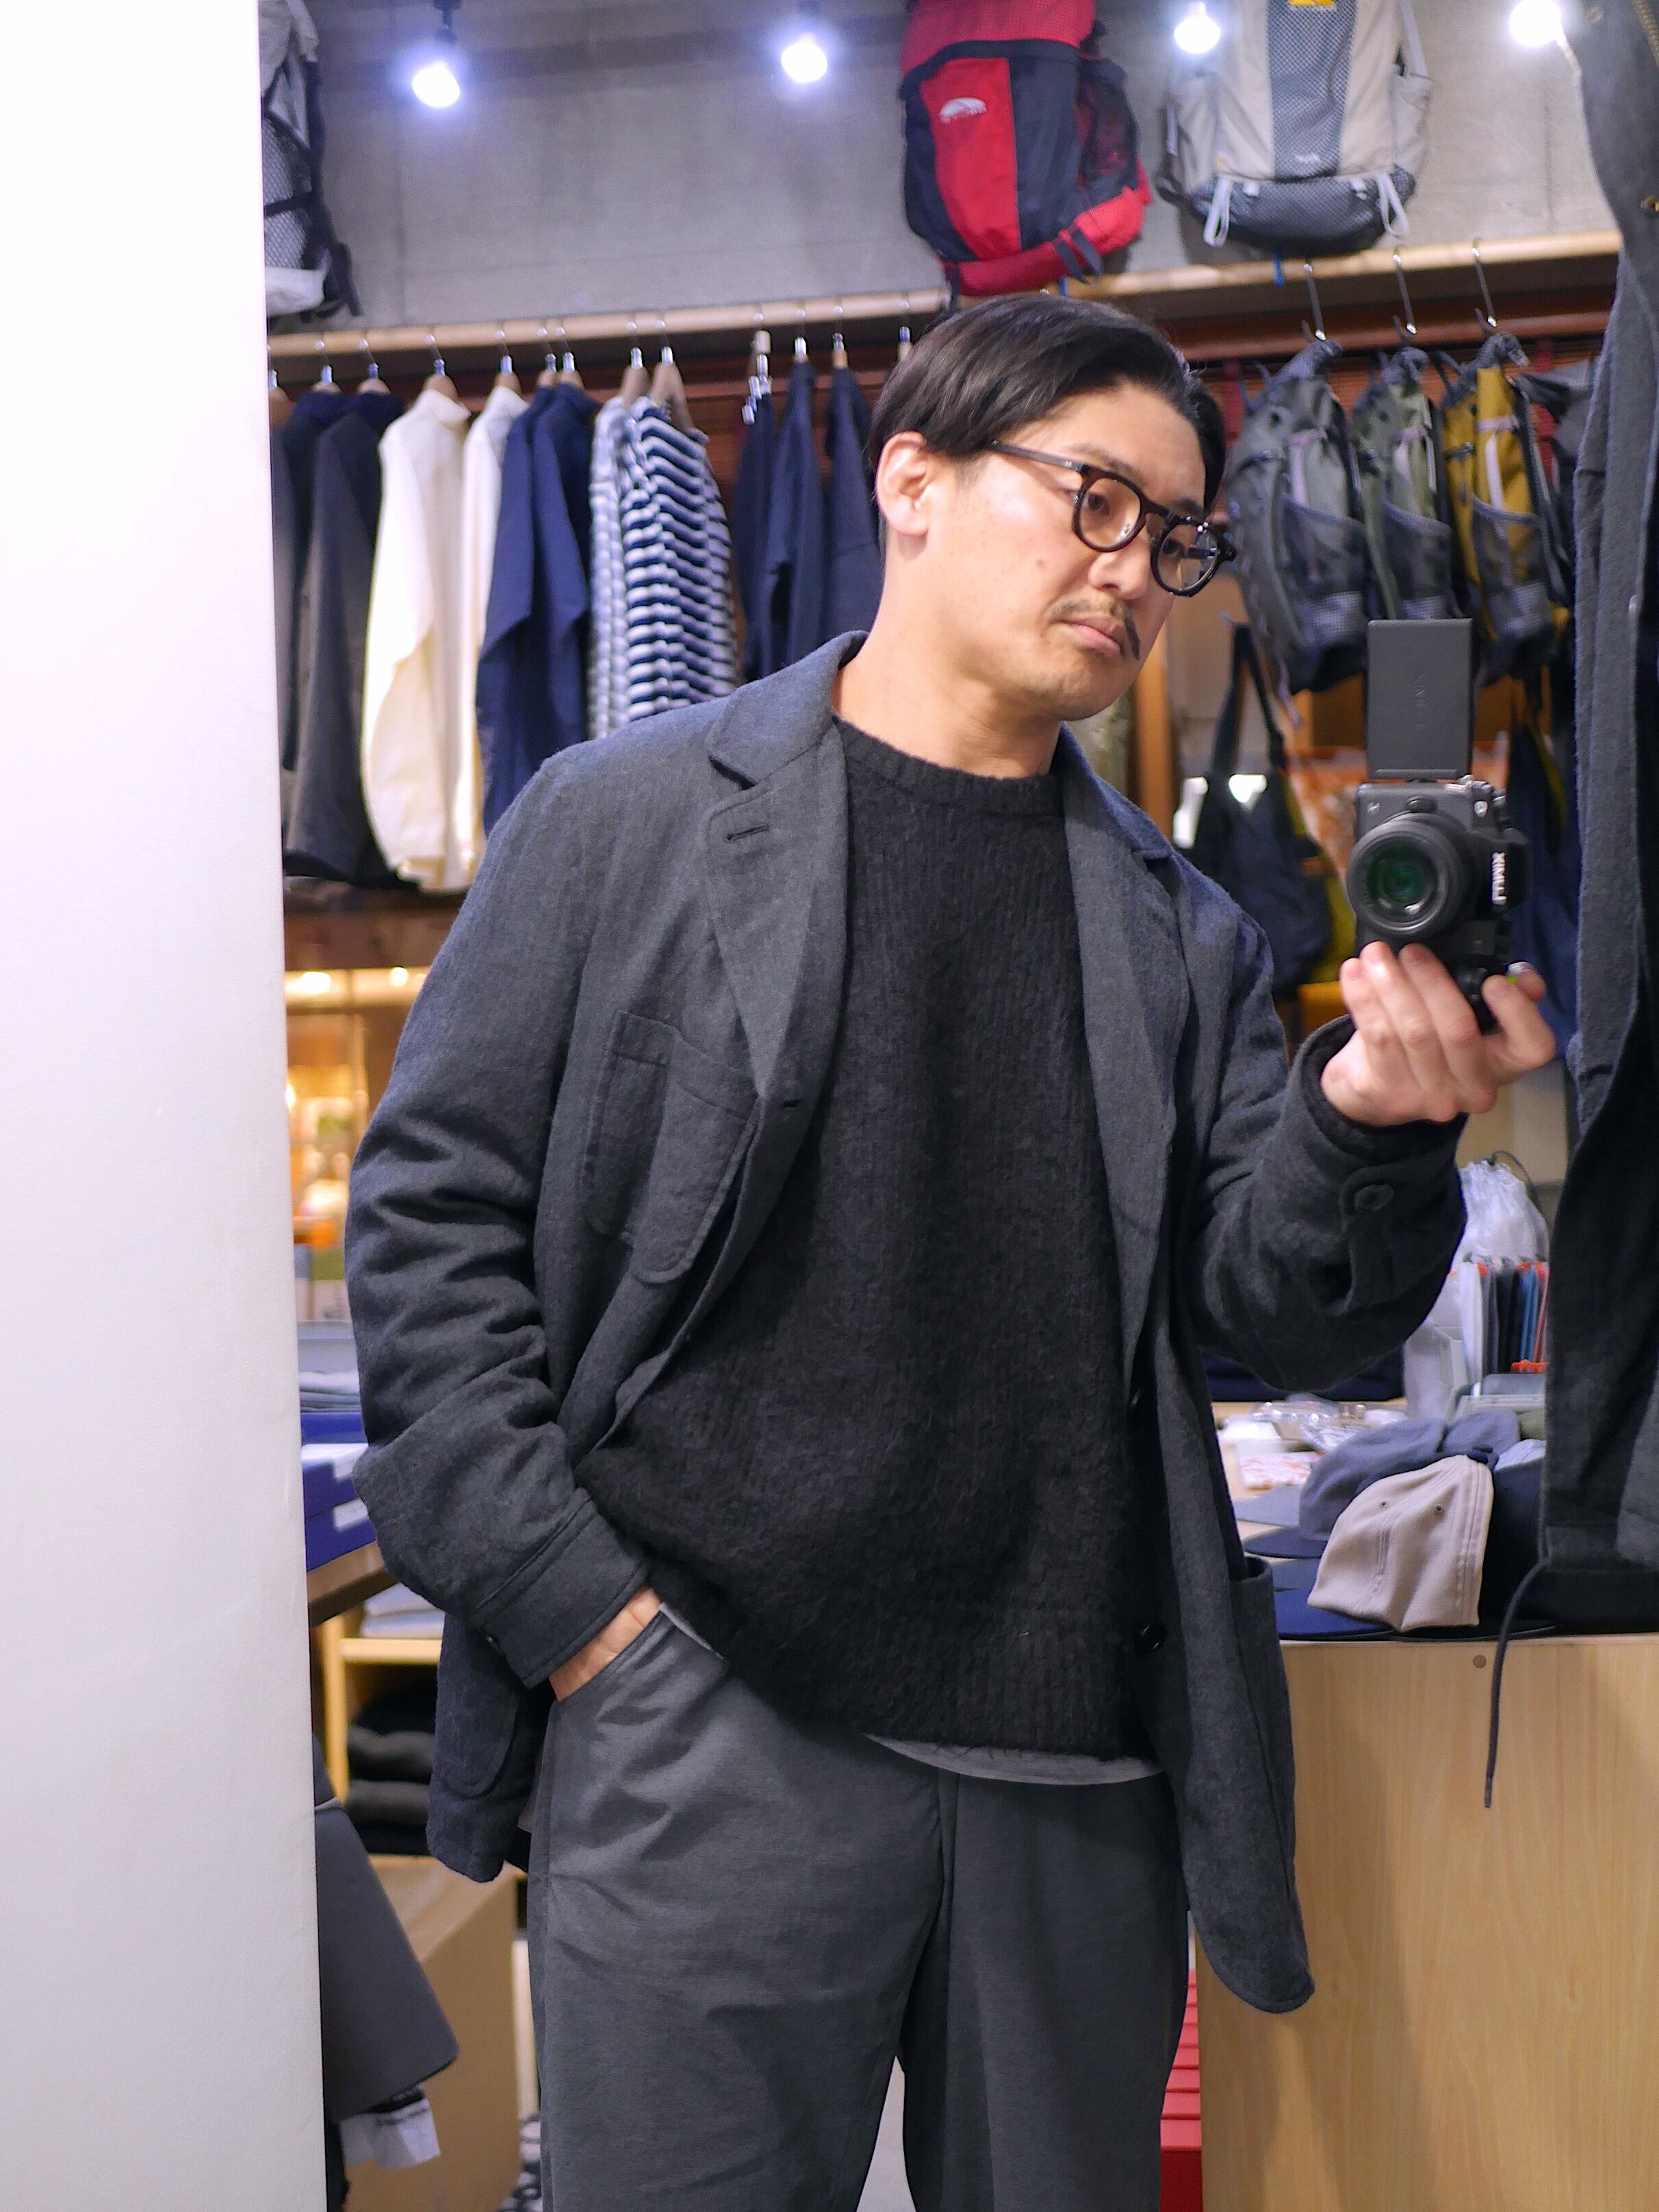 MOUNTAIN RESEARCH / FOLKS JKT | st. valley house - セントバレーハウス